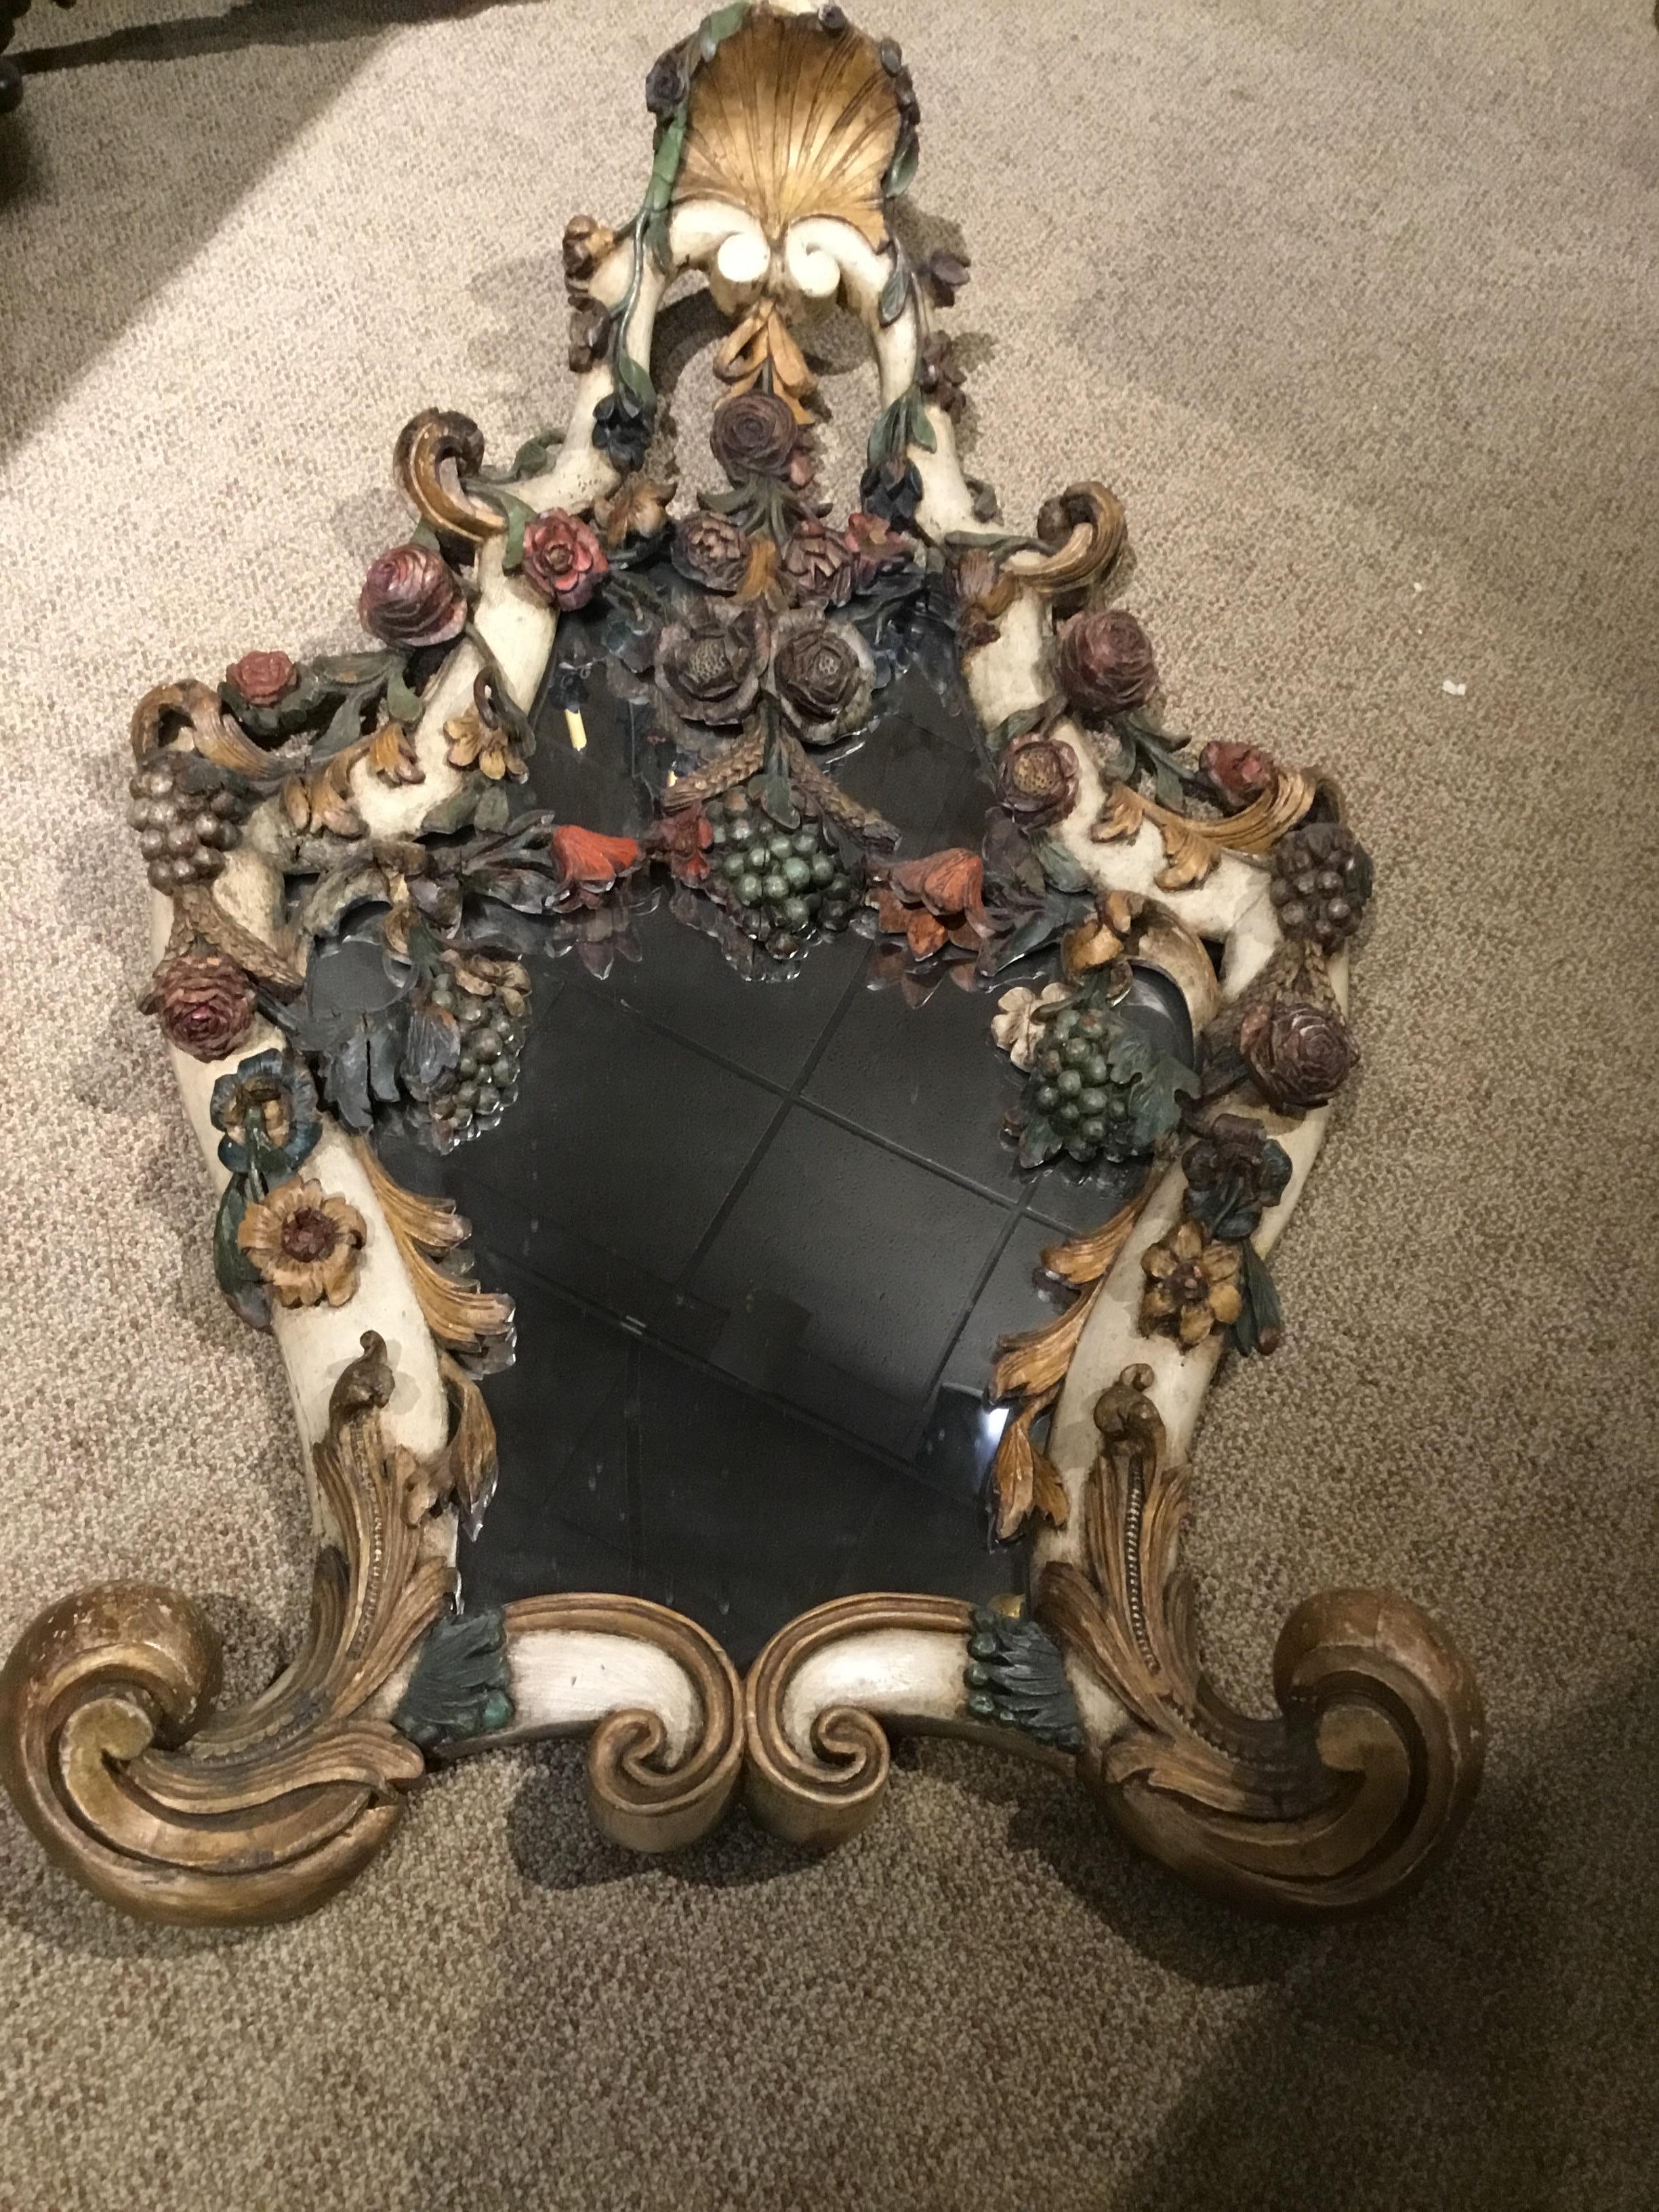 Beautifully hand carved Frame and polychromed in old world colors
Depicting flowers and fruits. Green, coral, gold and cream hues make
This mirror blend in perfectly with old world designs and interiors.